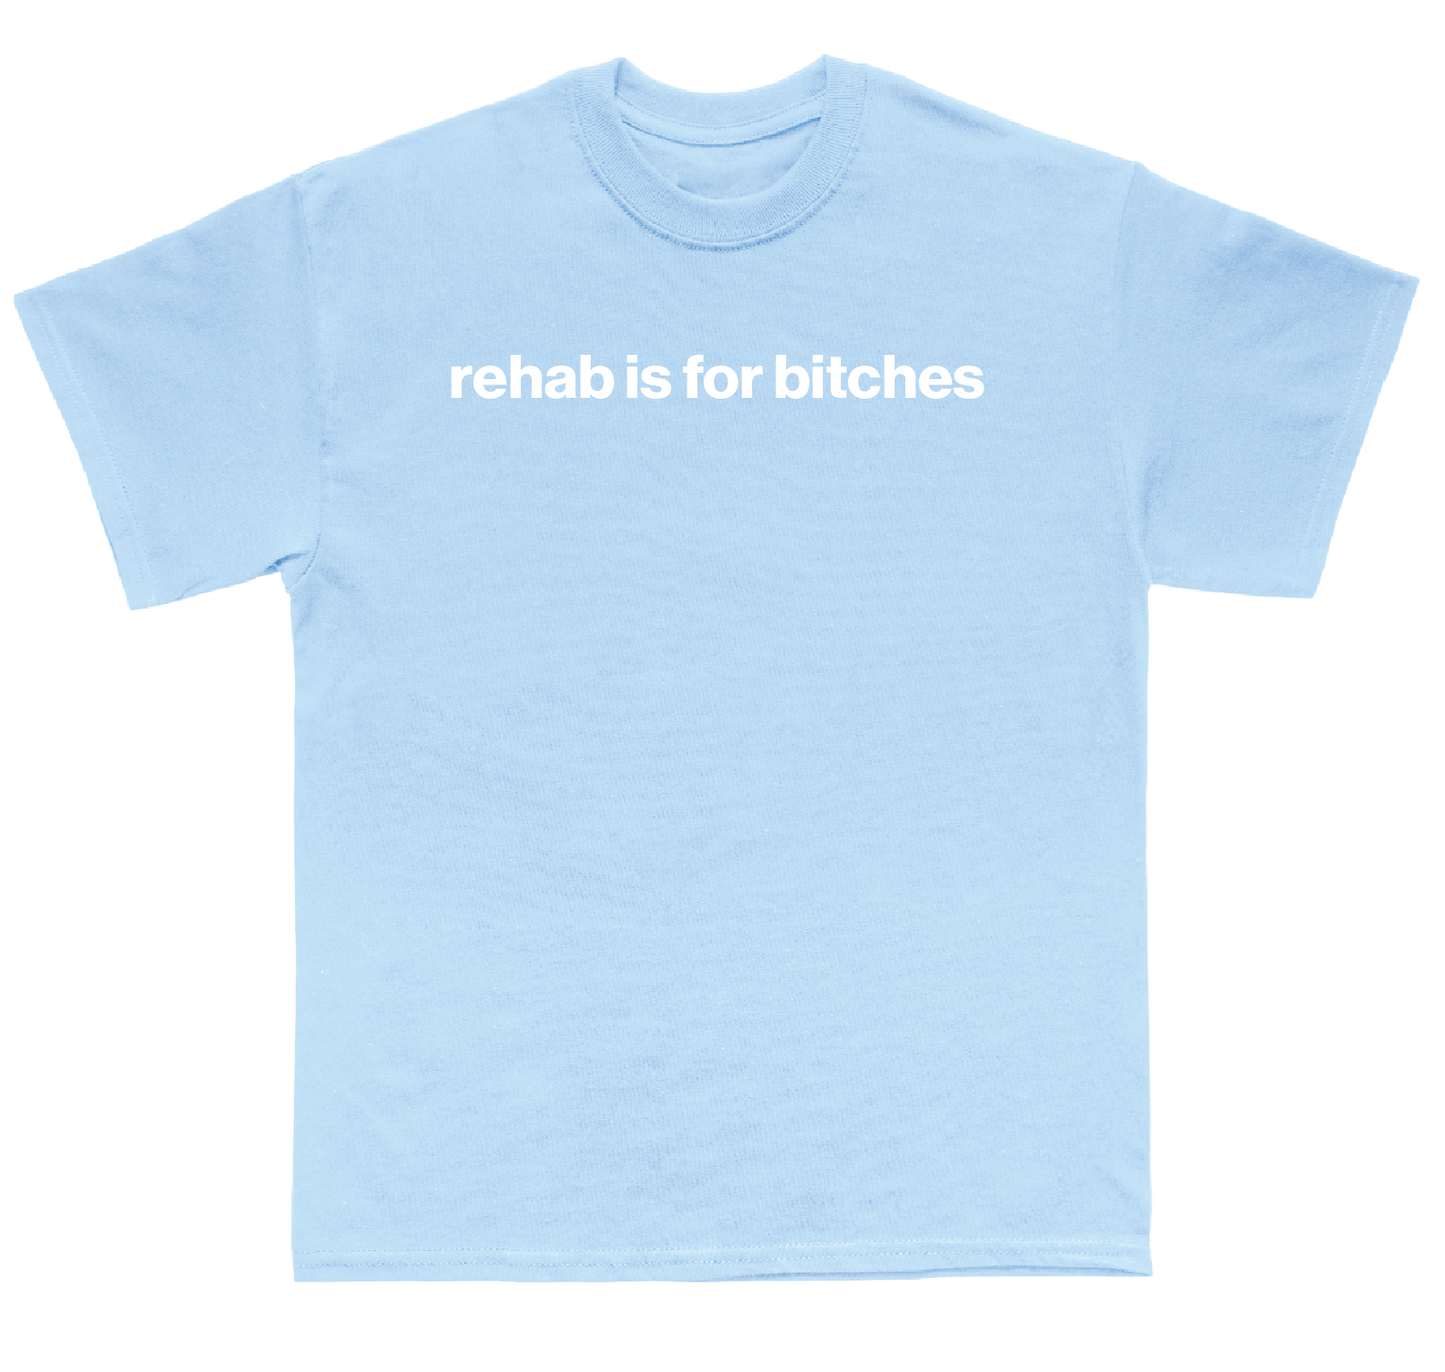 rehab is for bitches shirt